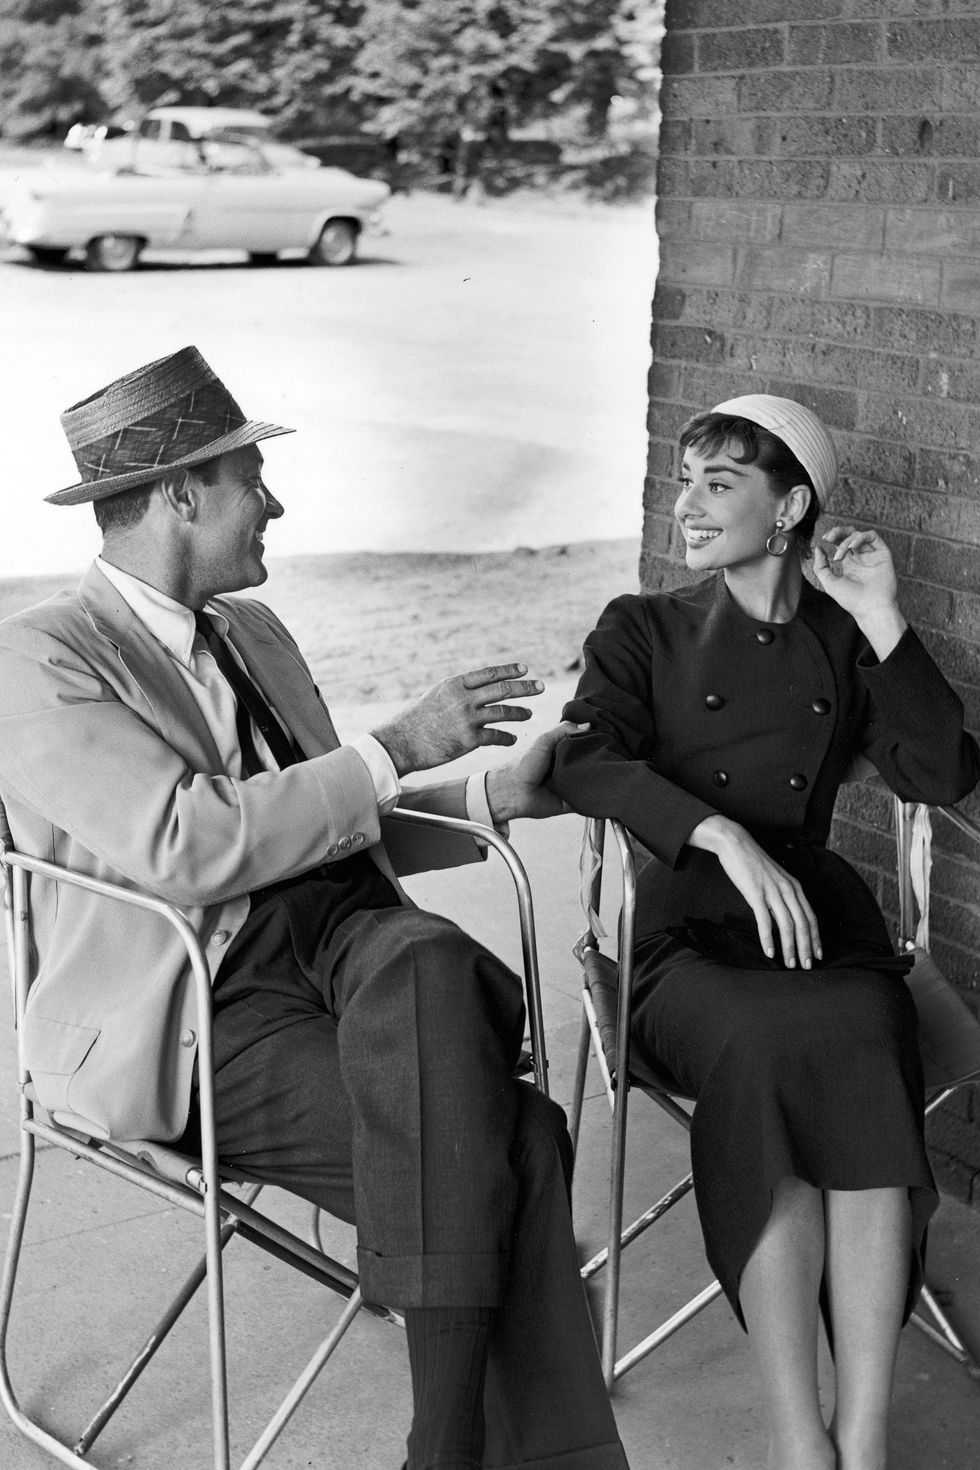 October 1953:  American actor William Holden (1918 - 1981) and Belgian-born actor Audrey Hepburn (1929 - 1993) sit next to each other in chairs talking, on the set of director Billy Wilder's film, 'Sabrina'. Both are wearing hats and smiling.  (Photo by Hulton Archive/Getty Images)